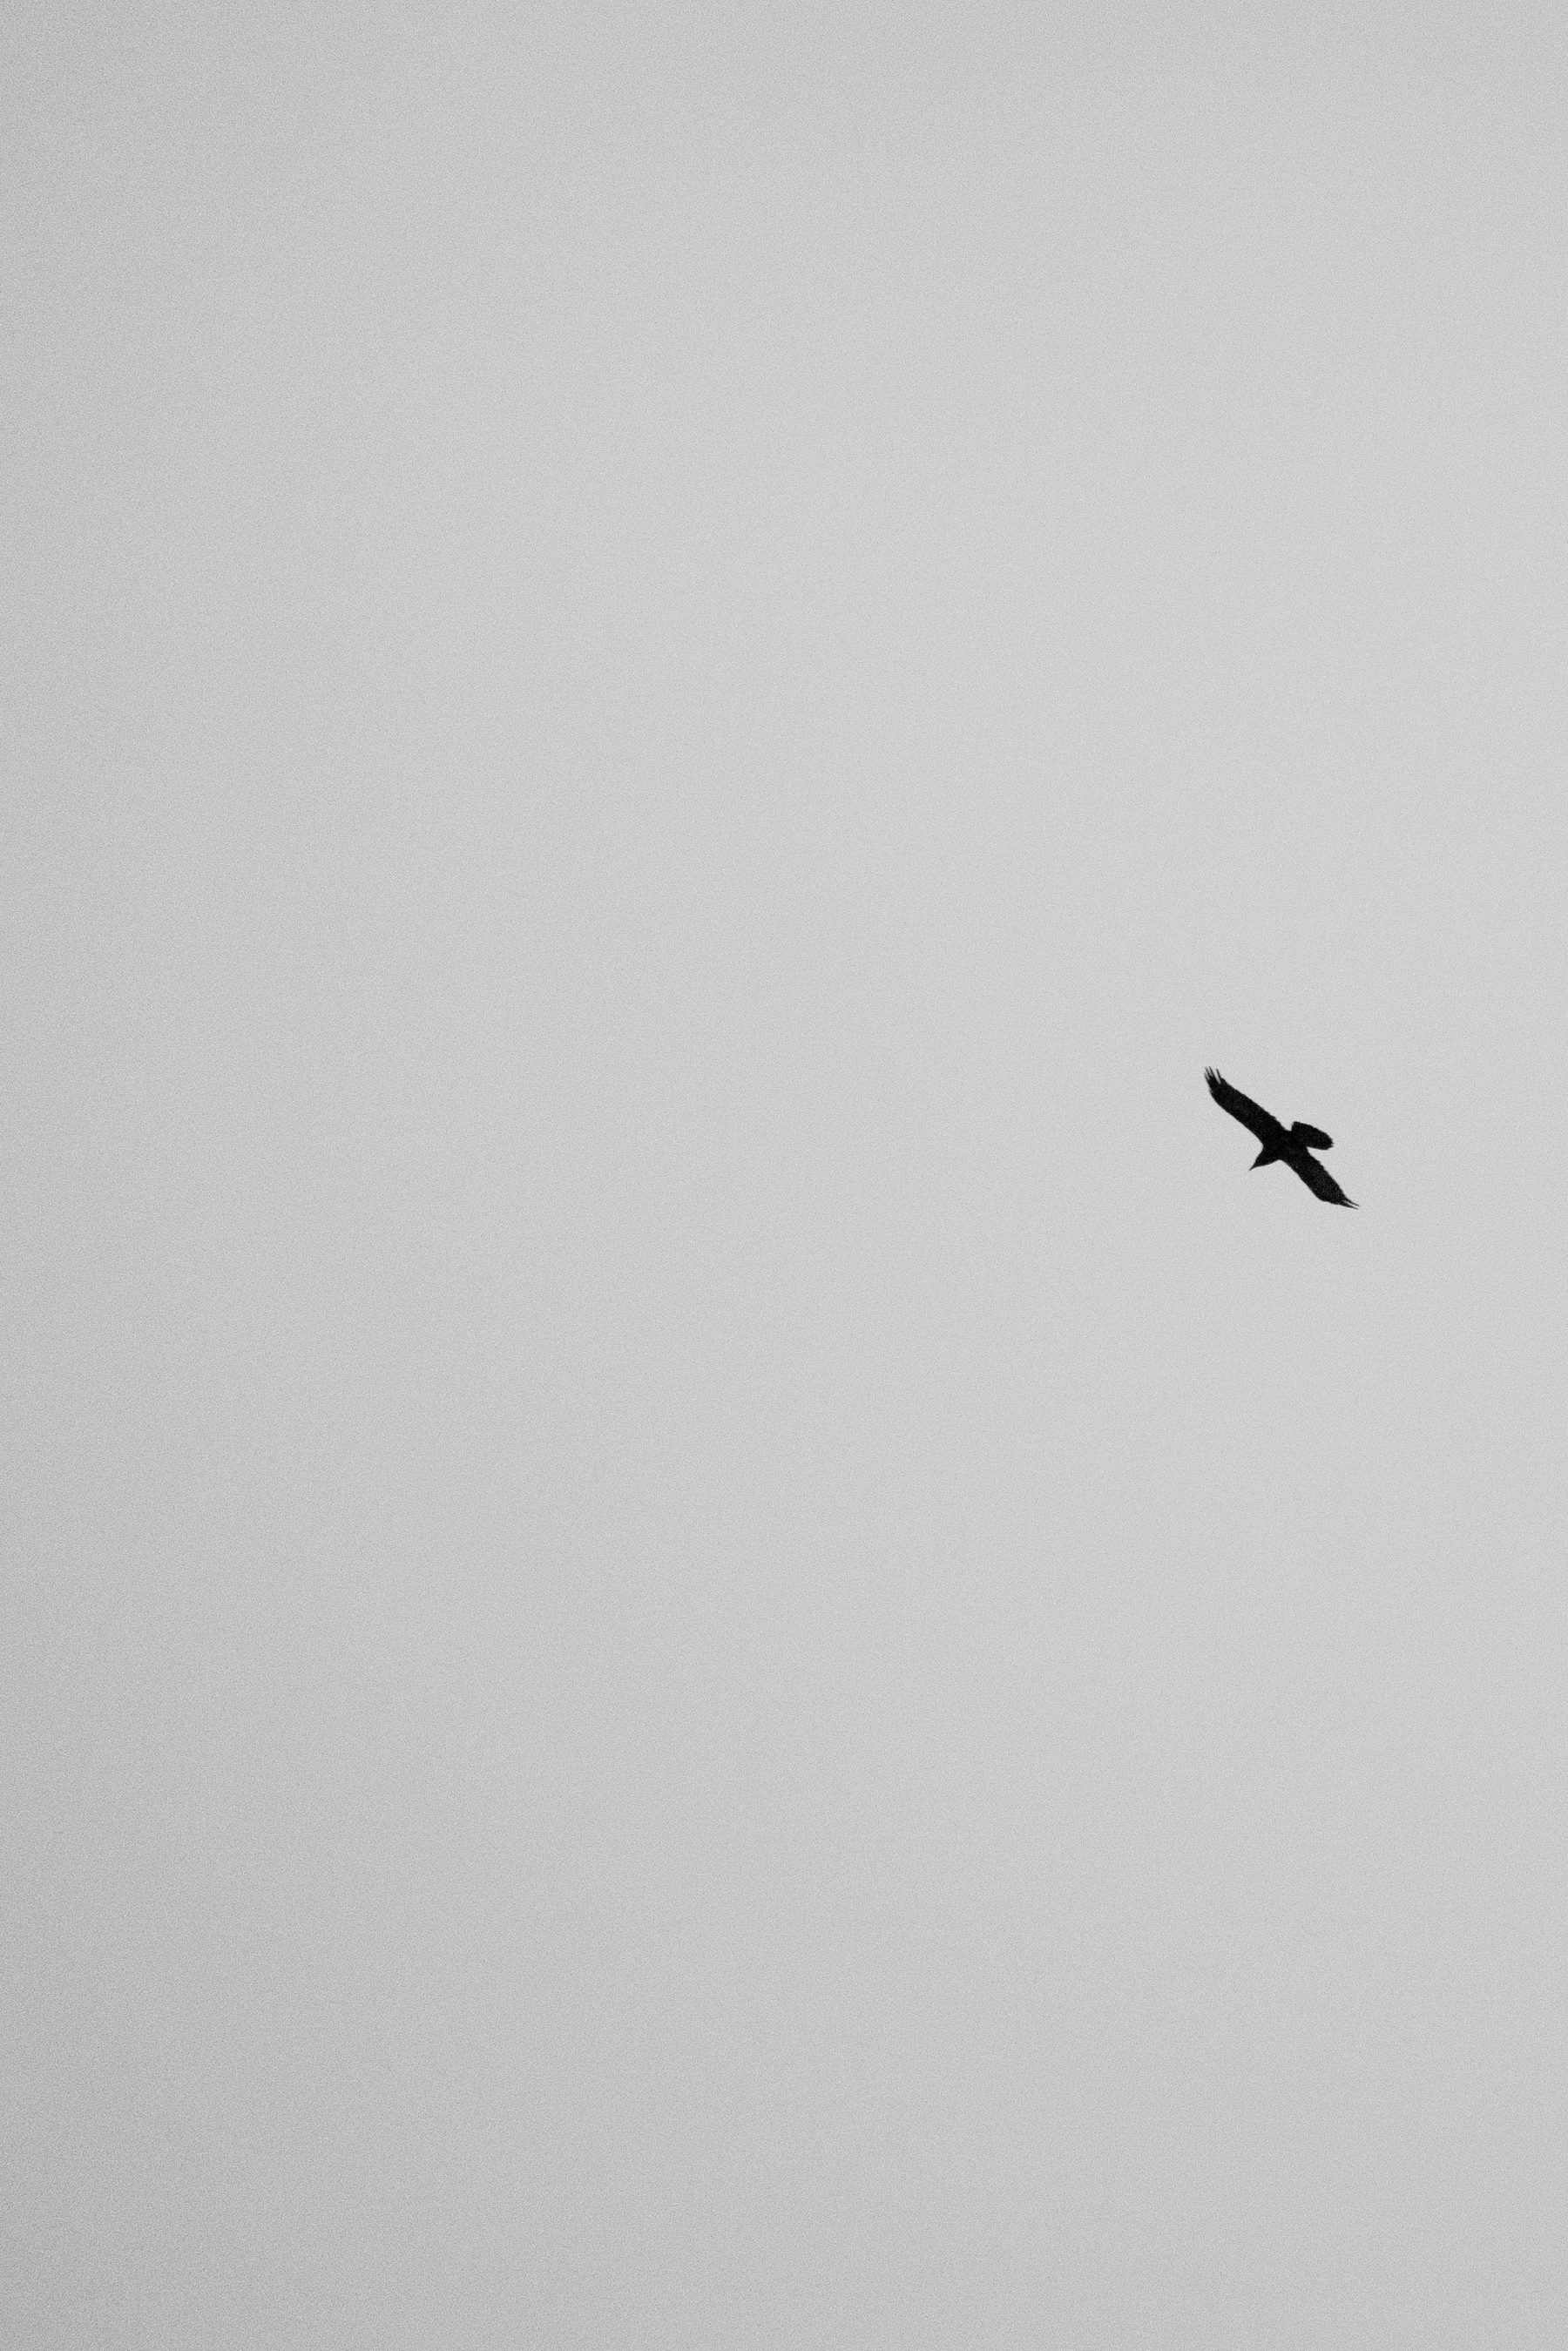 A lone raven flies against a clear sky